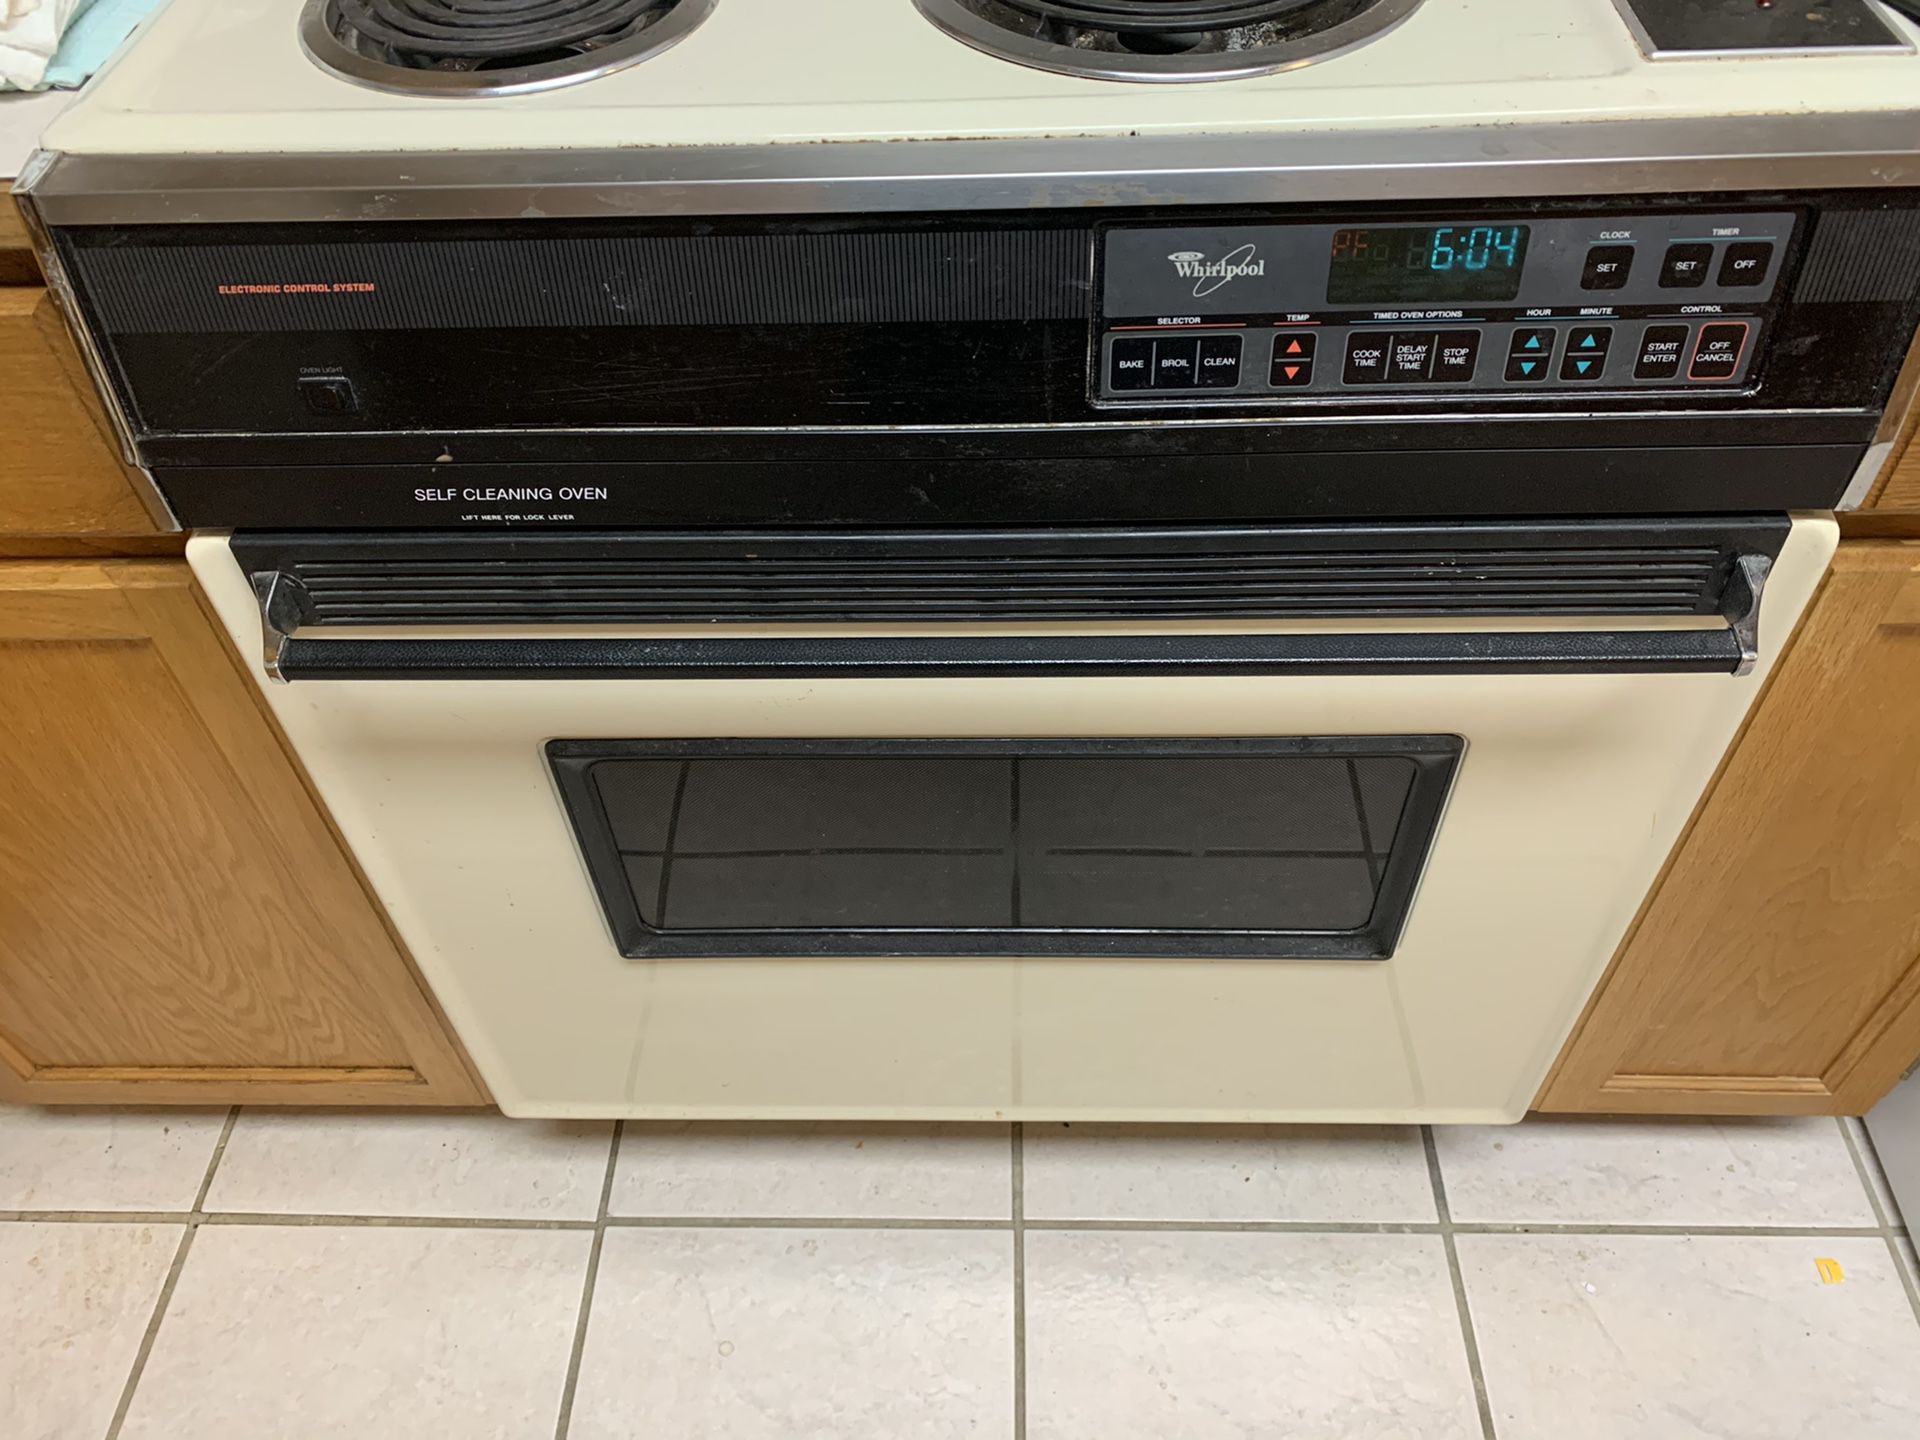 ALL Whirlpool Electric drop in stove, over the stove microwave and dishwasher.